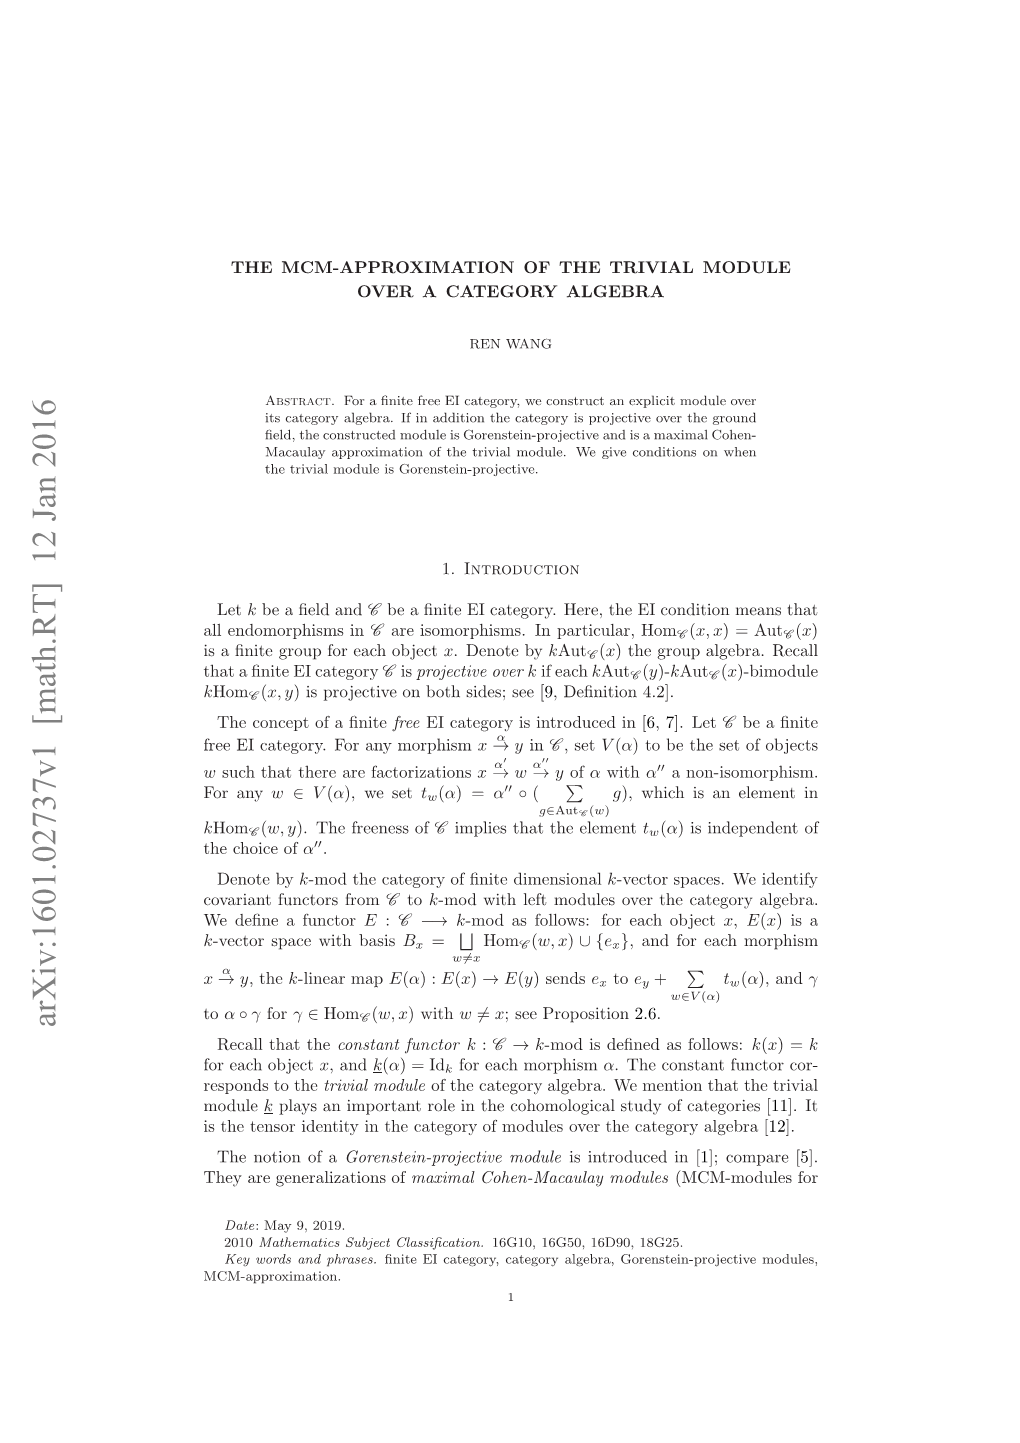 THE MCM-APPROXIMATION of the TRIVIAL MODULE OVER a CATEGORY ALGEBRA3 Unfactorizable Morphism